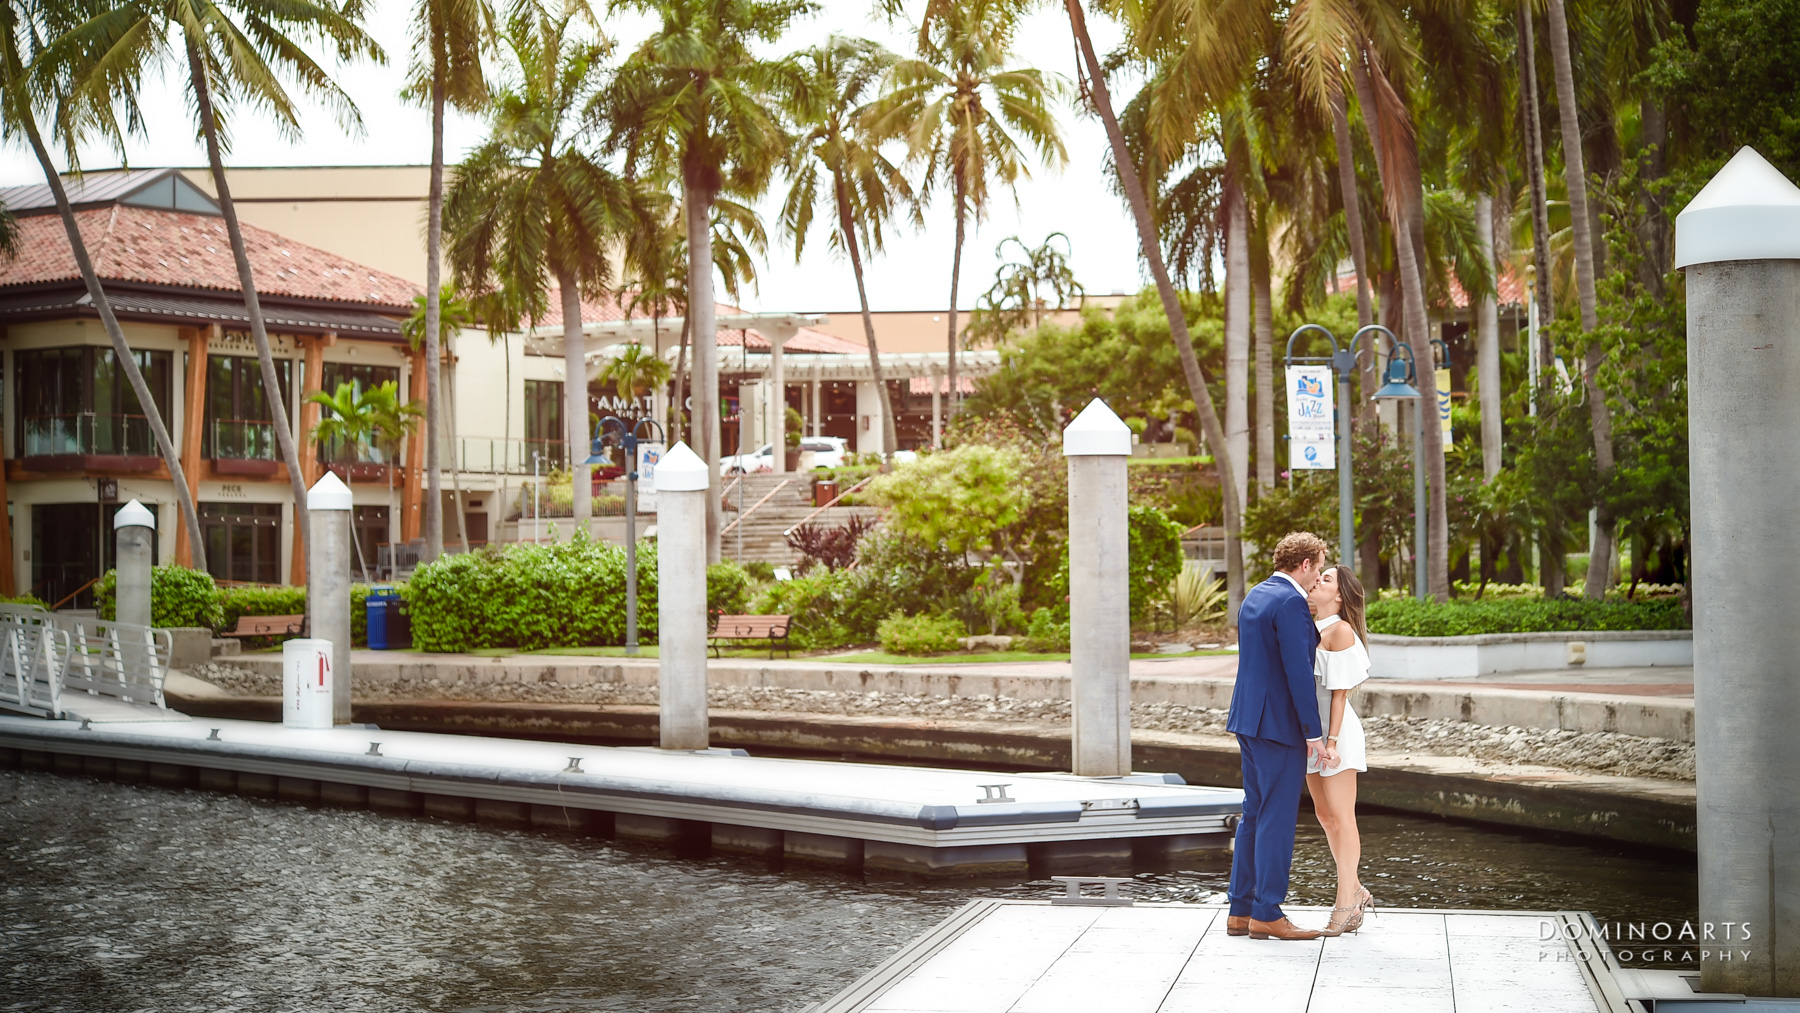 Cute kissing picture at Engagement photography at Riverfront, Fort Lauderdale